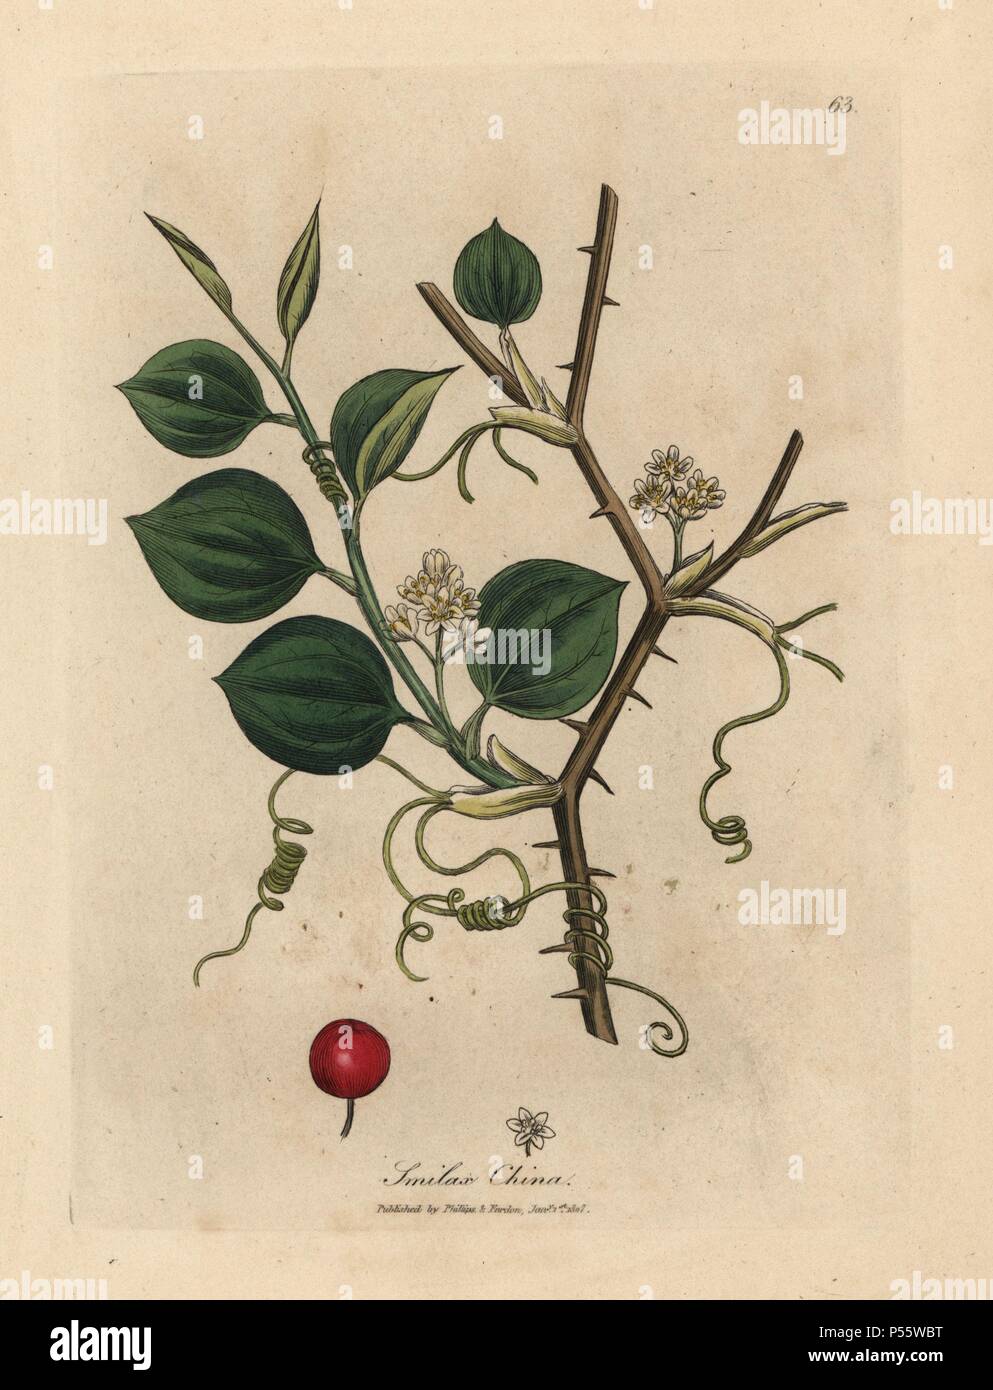 White flowers, tendrils and red berry of Chinese smilax, Smilax china. Handcolored copperplate engraving from a botanical illustration by James Sowerby from William Woodville and Sir William Jackson Hooker's 'Medical Botany' 1832. The tireless Sowerby (1757-1822) drew over 2,500 plants for Smith's mammoth 'English Botany' (1790-1814) and 440 mushrooms for 'Coloured Figures of English Fungi ' (1797) among many other works. Stock Photo